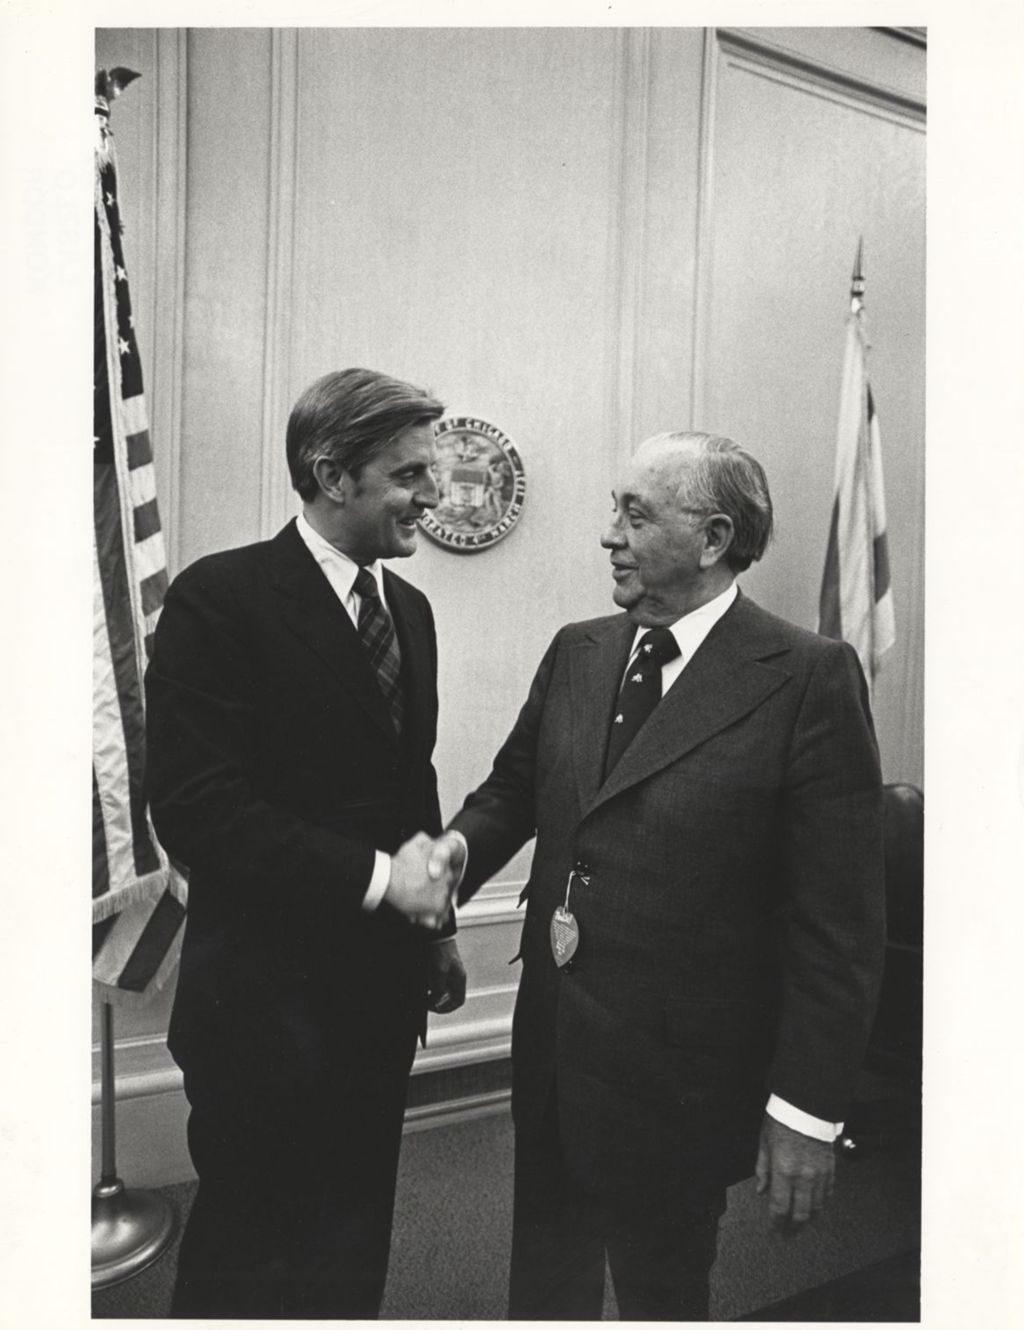 Richard J. Daley with Walter Mondale